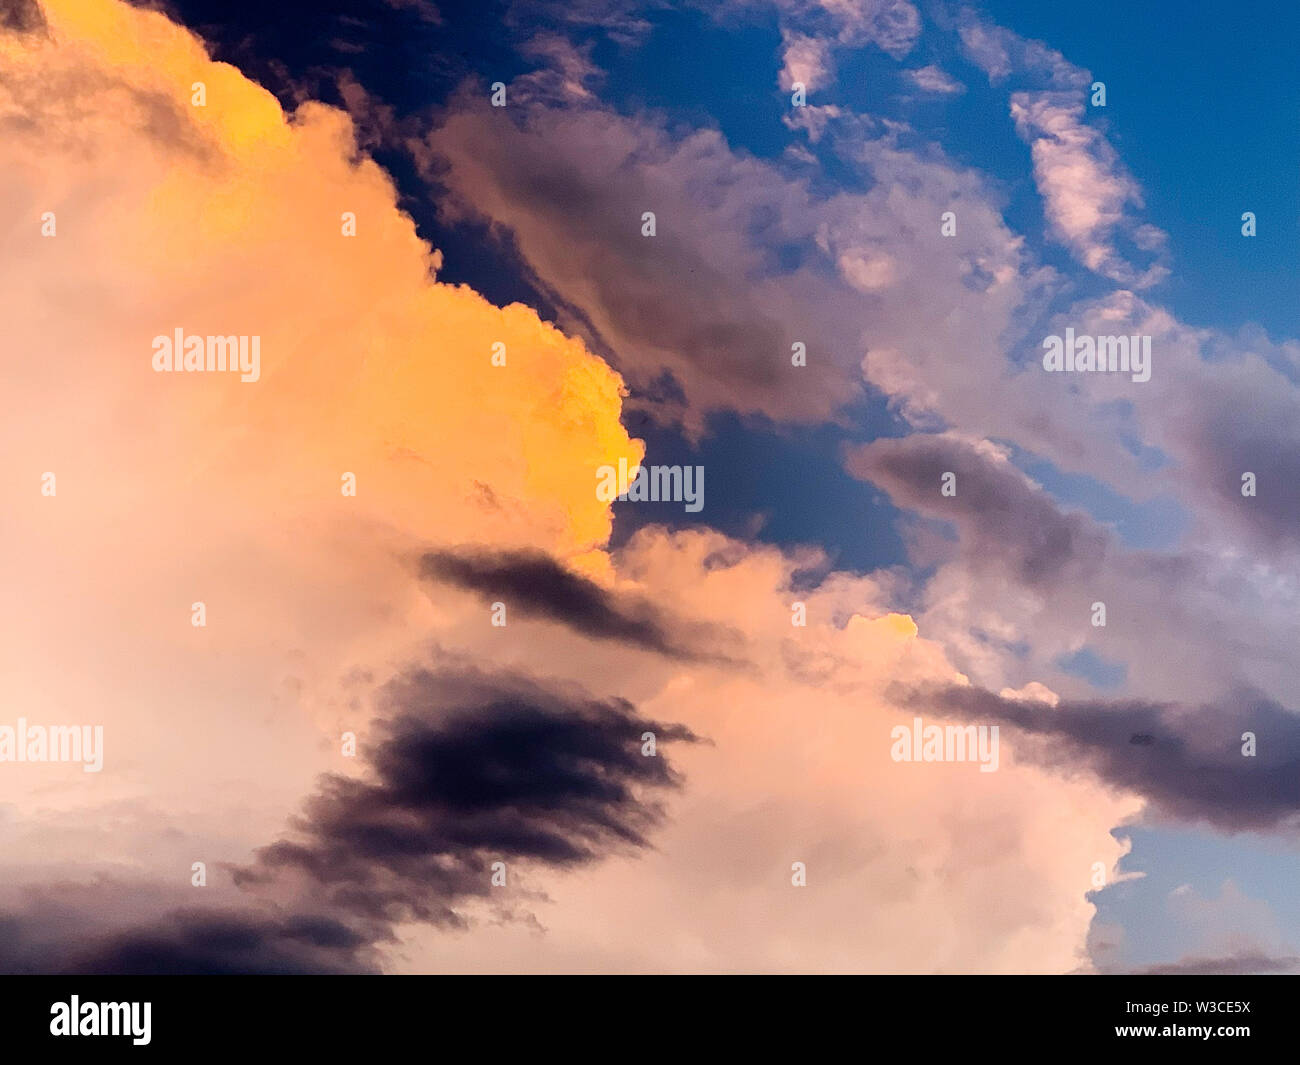 Dramatic evening sky with orange and dark storm clouds against the blue sky. Concept of upcoming storm and beautiful backdrop Stock Photo